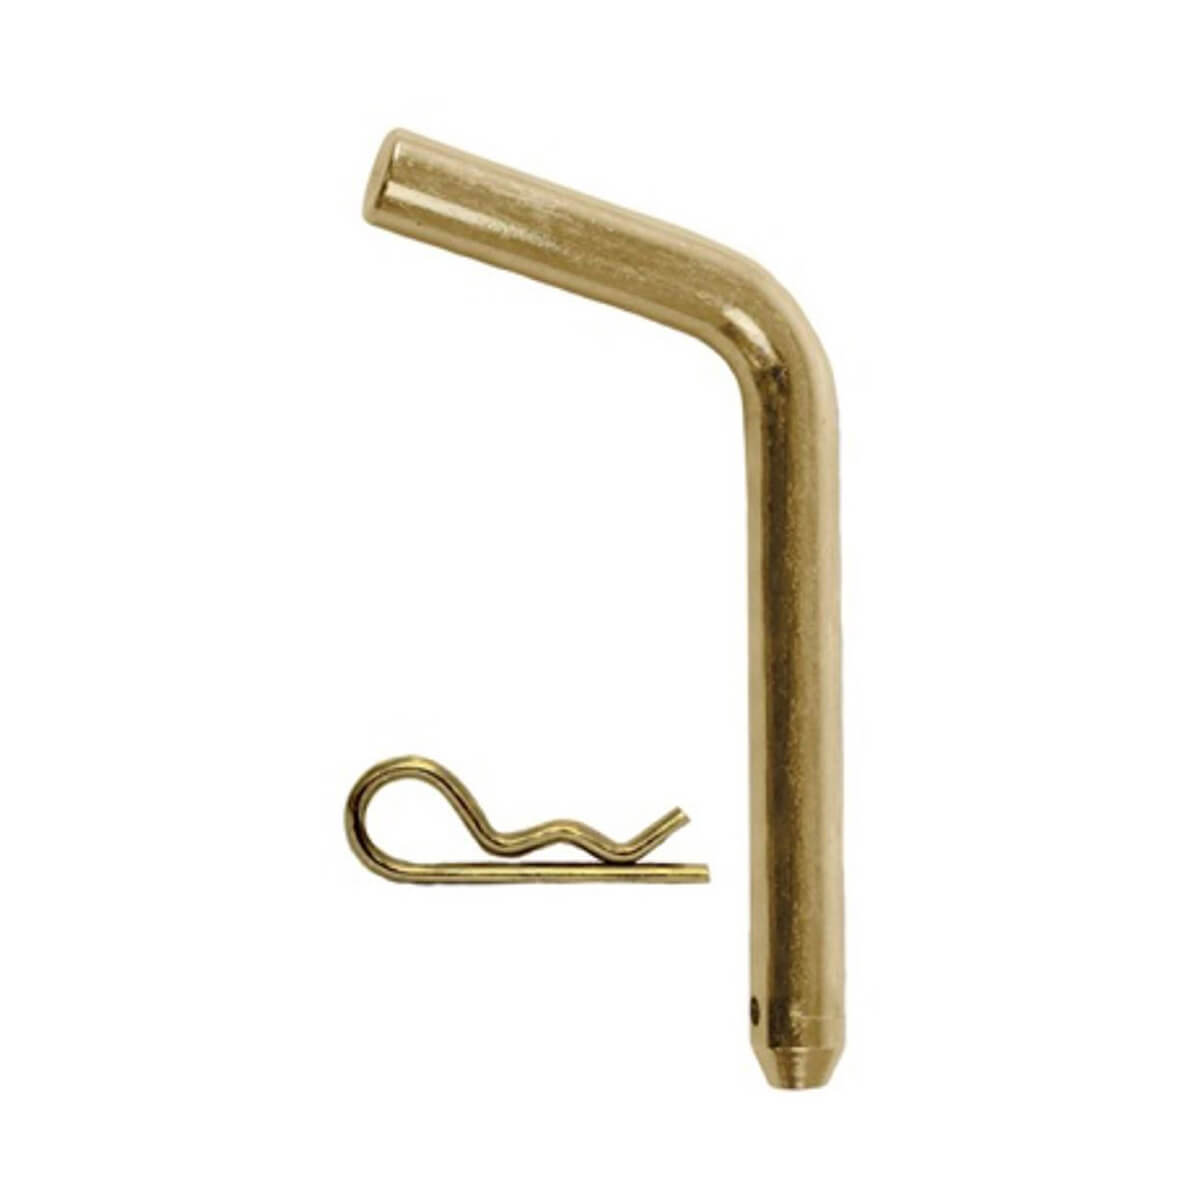 Bent Pin - 1/2-in x 2-1/2-in